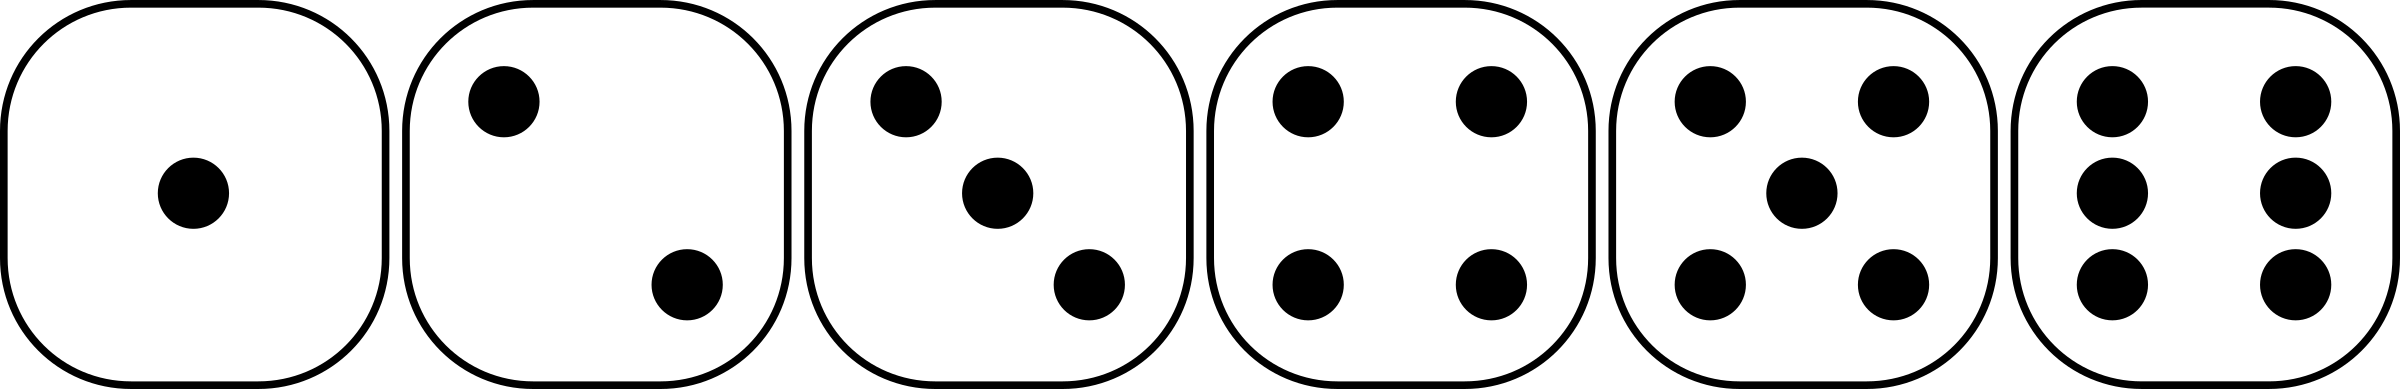 Dice Clipart Six Sided - Individual Dice Sides 1 (2400x389)